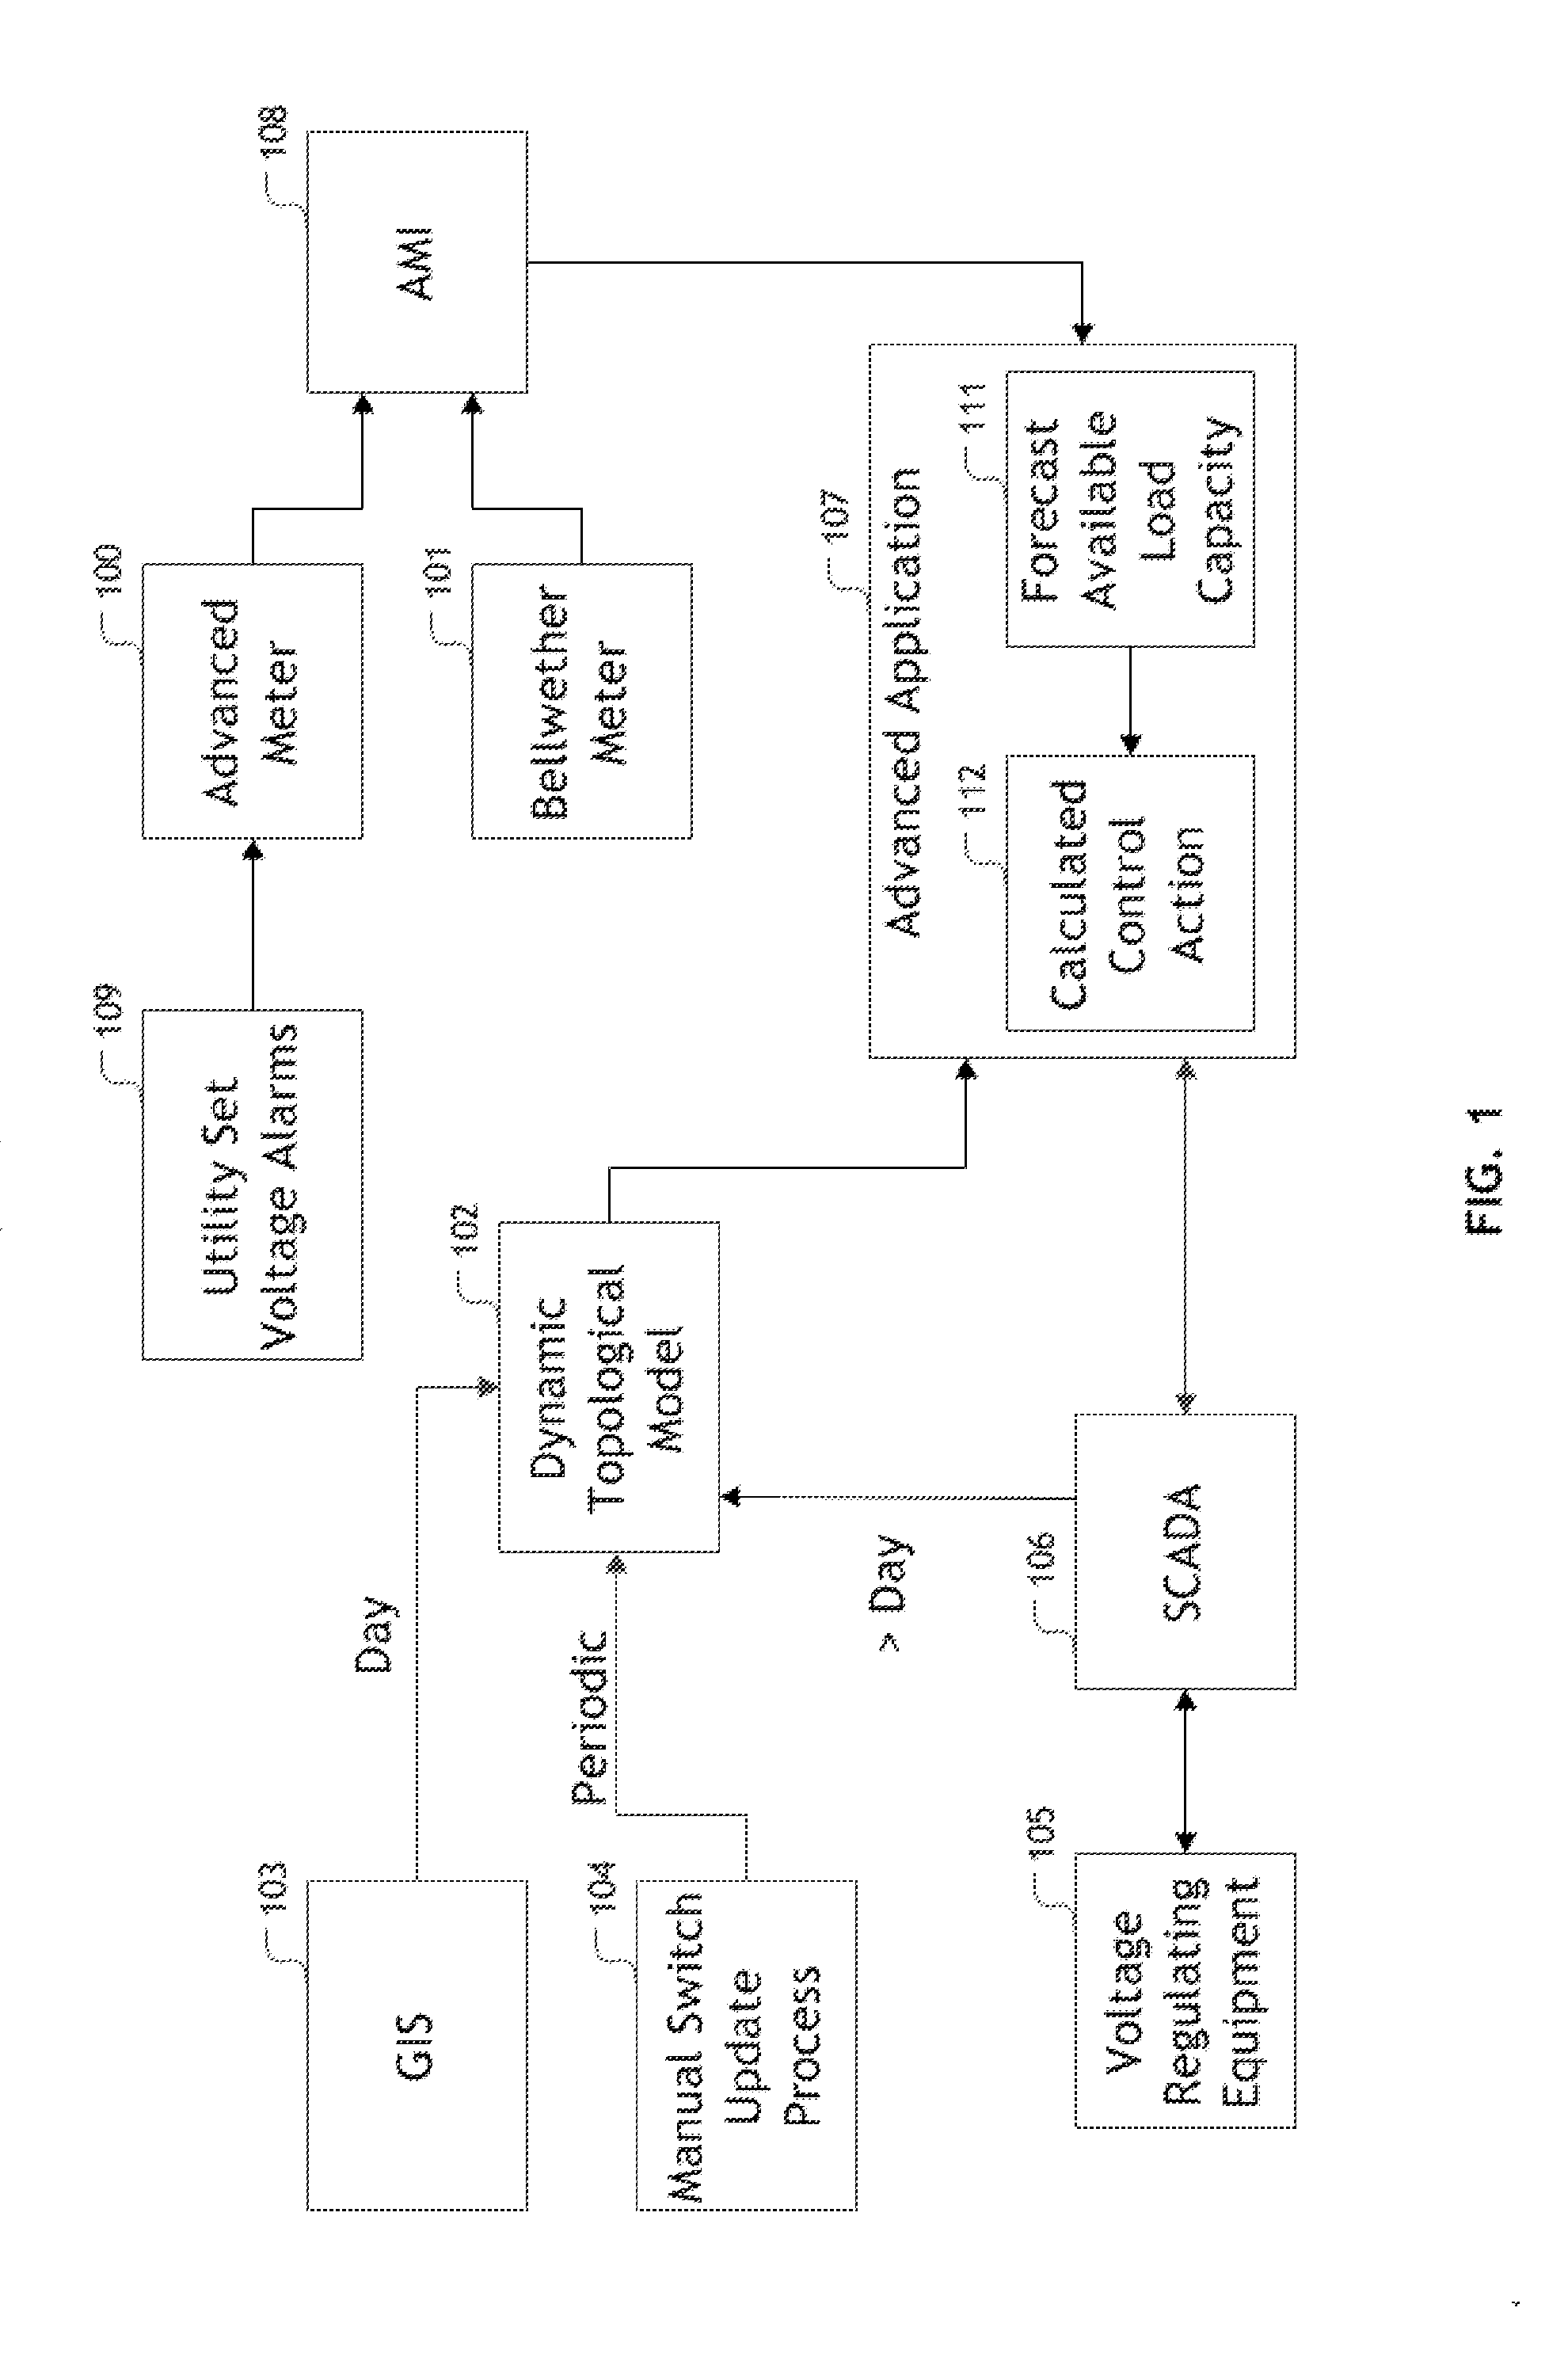 Practical conservation voltage reduction formulation and method utilizing measurement and/or alarming information from intelligent data gathering and communication technology devices